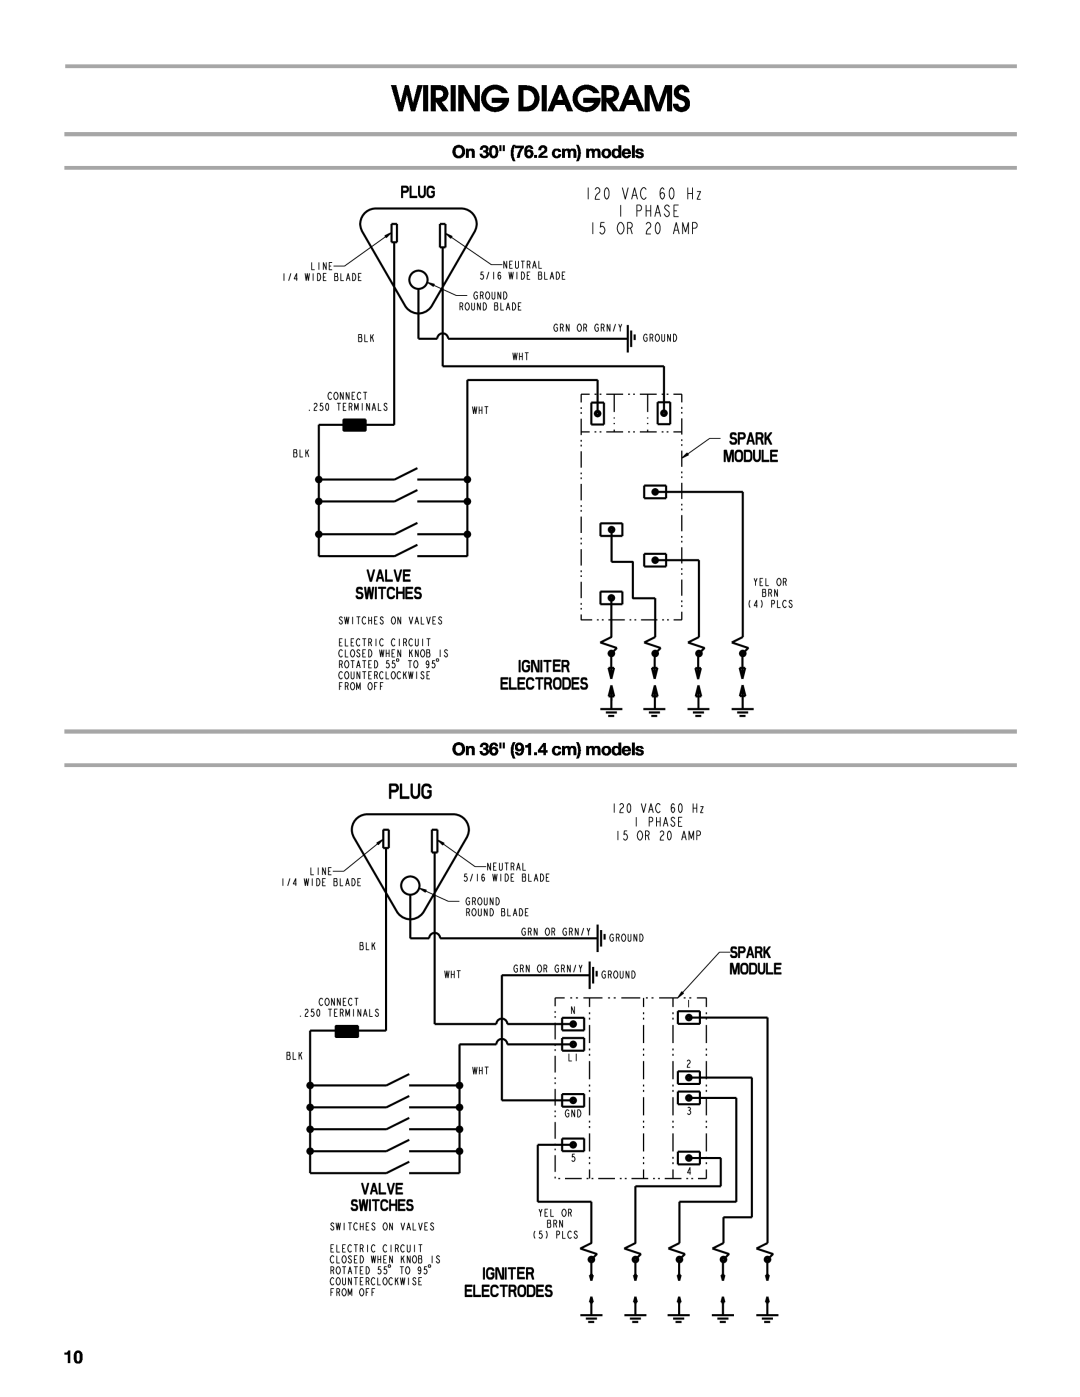 Whirlpool W10131955B installation instructions Wiring Diagrams, On 30 76.2 cm models On 36 91.4 cm models 